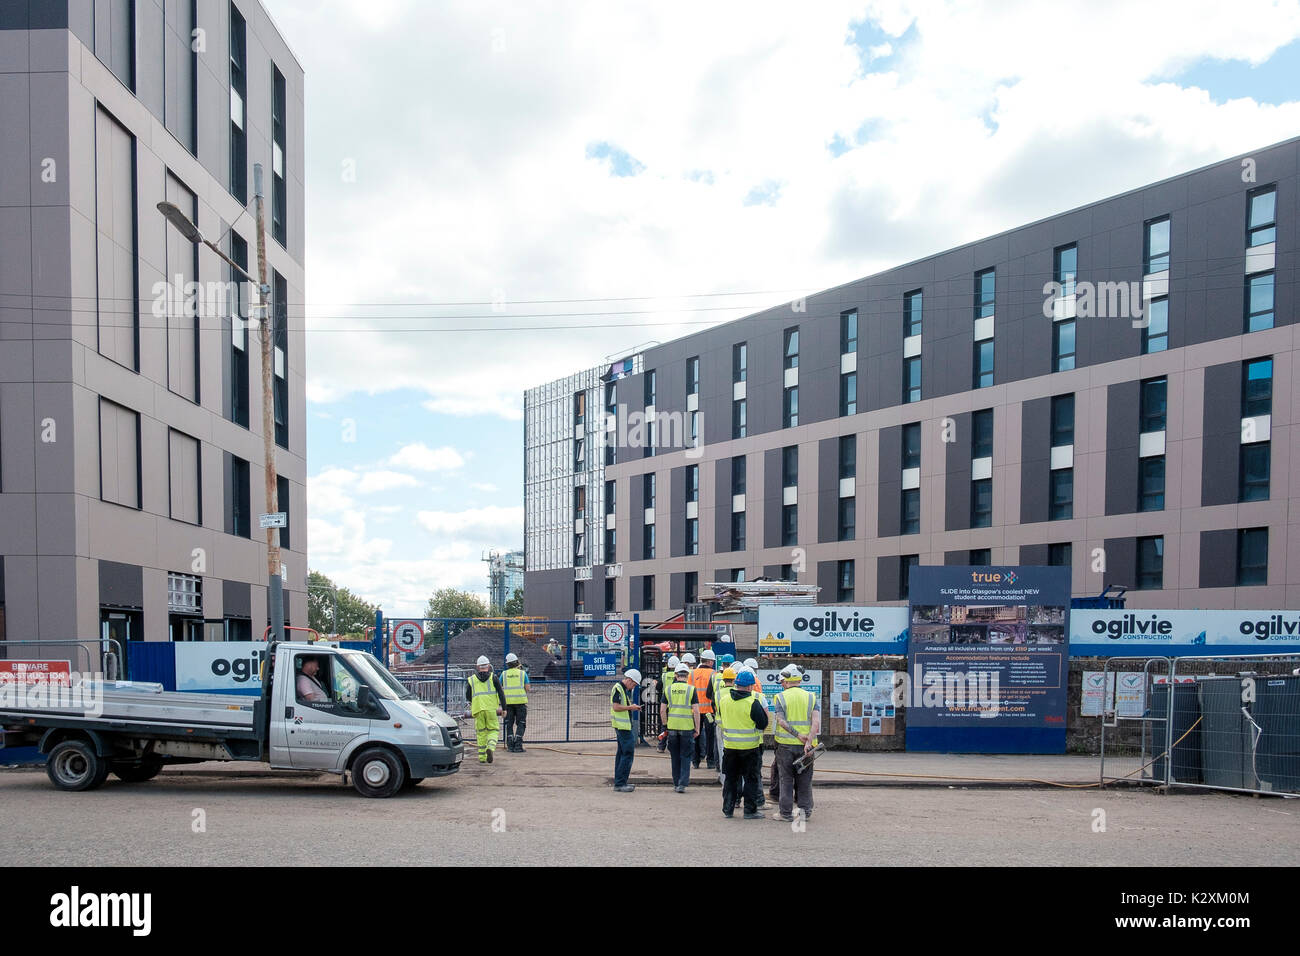 Workers queue to access Ogilvie Construction site on Kelvinhaugh Street Glasgow where new student residences are being built Stock Photo